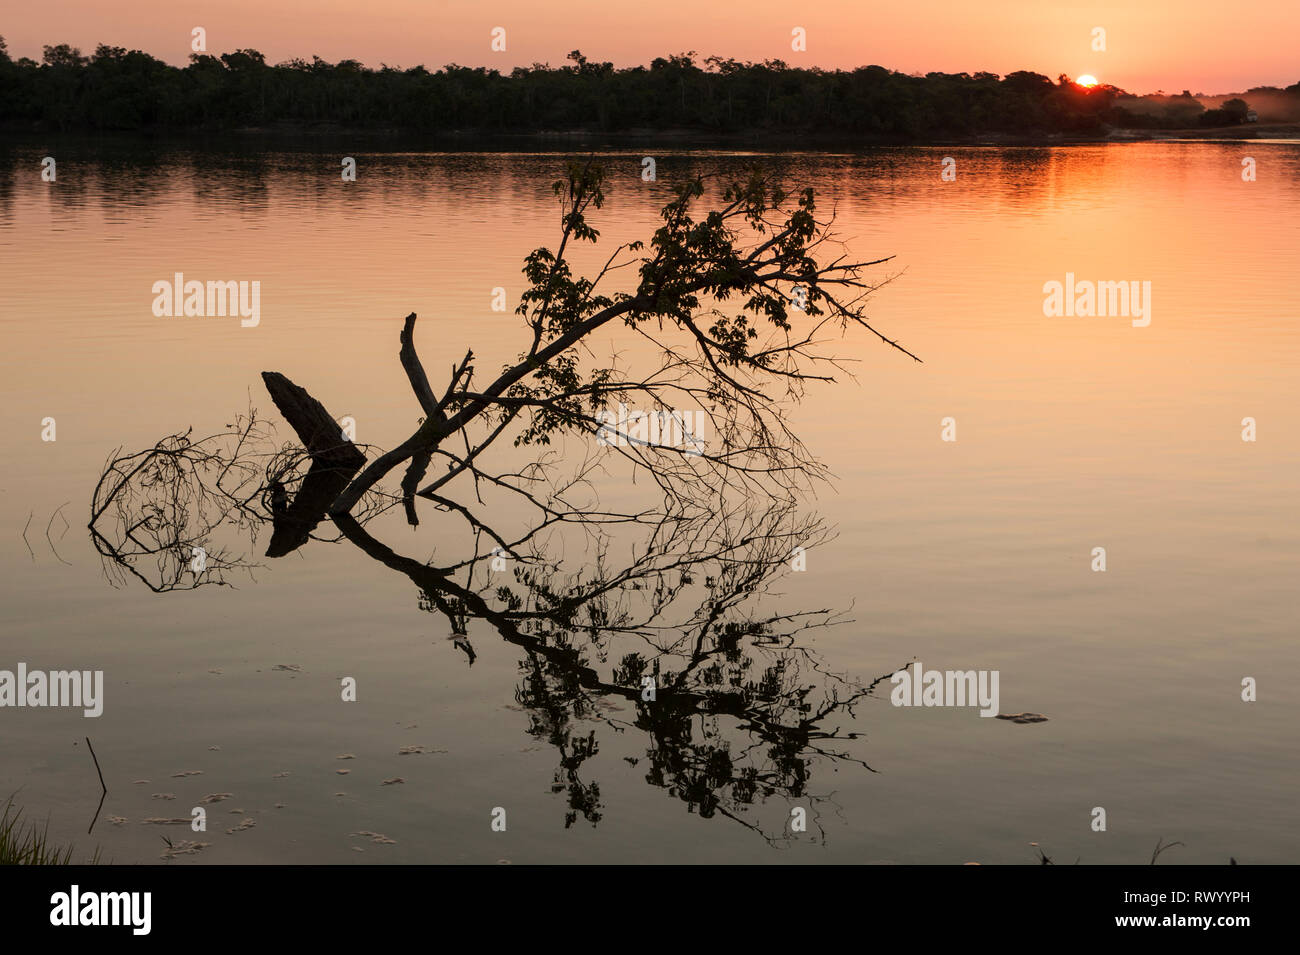 Mato Grosso State, Brazil. Sunset on the Xingu River with submerged trees. Stock Photo